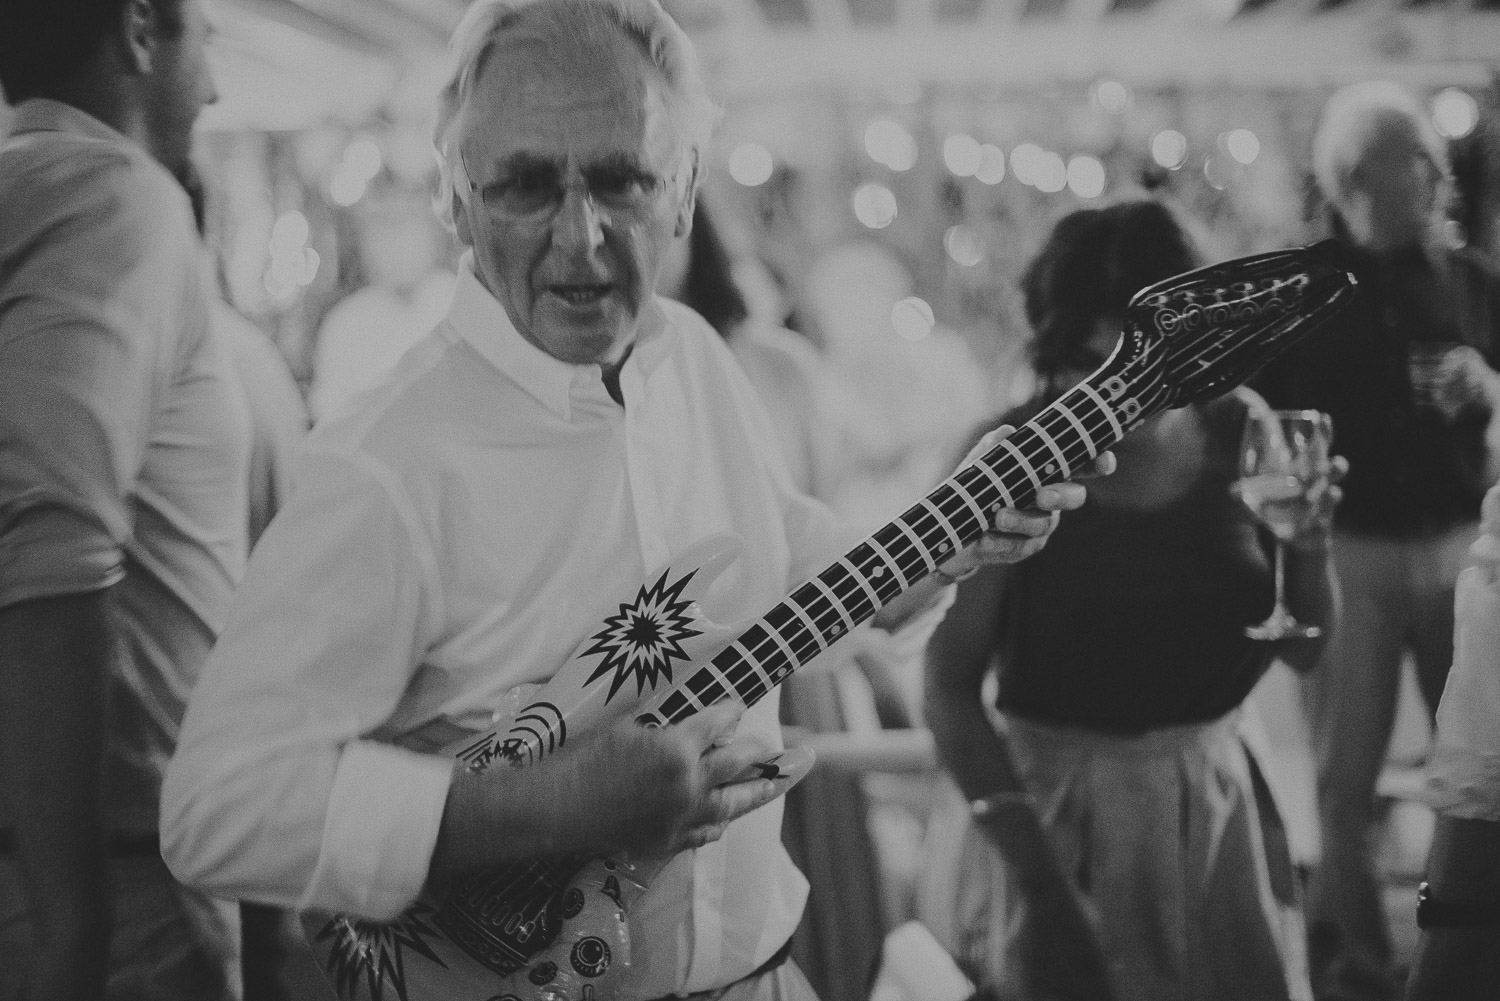 Wedding photographer Mykonos: black and white photo of father of the bride with inflatable guitar at Elia during Mykonos wedding.